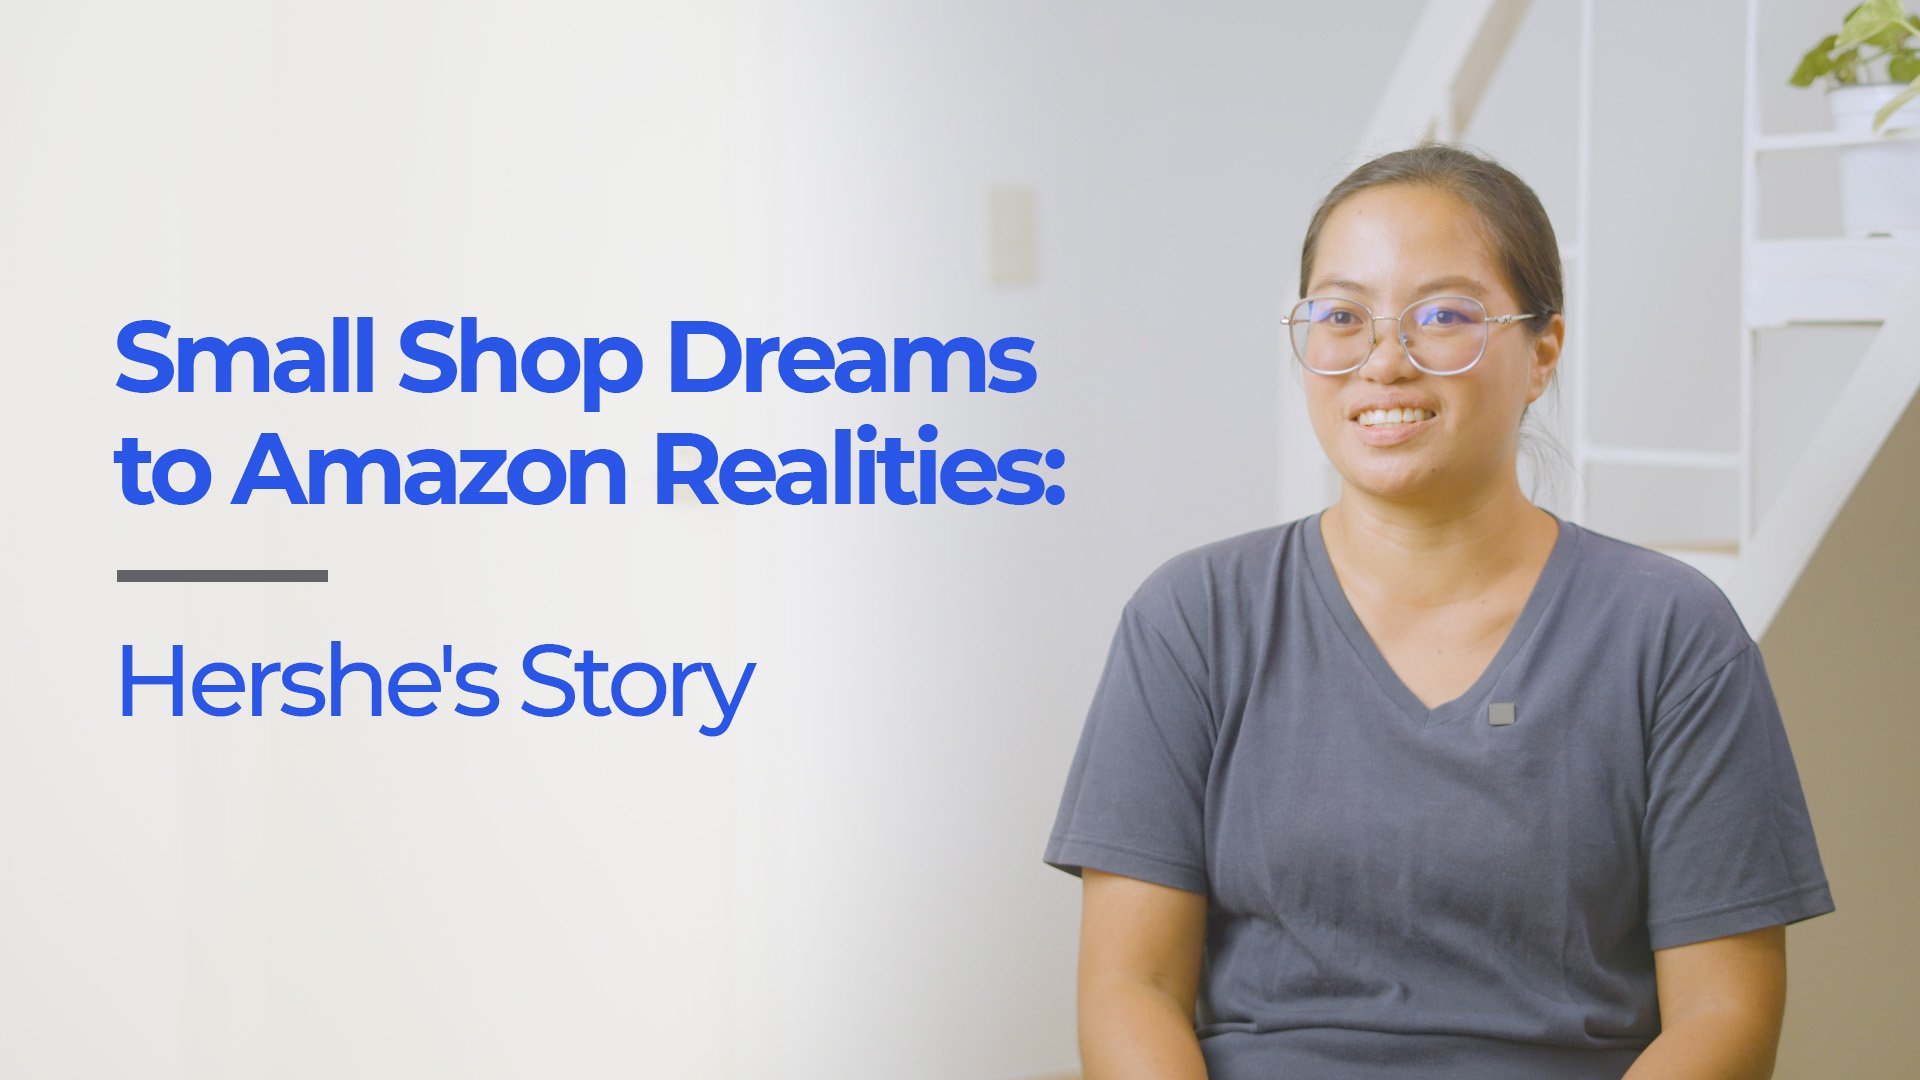 Small Shop Dreams to Amazon Realities: Hershe’s Story